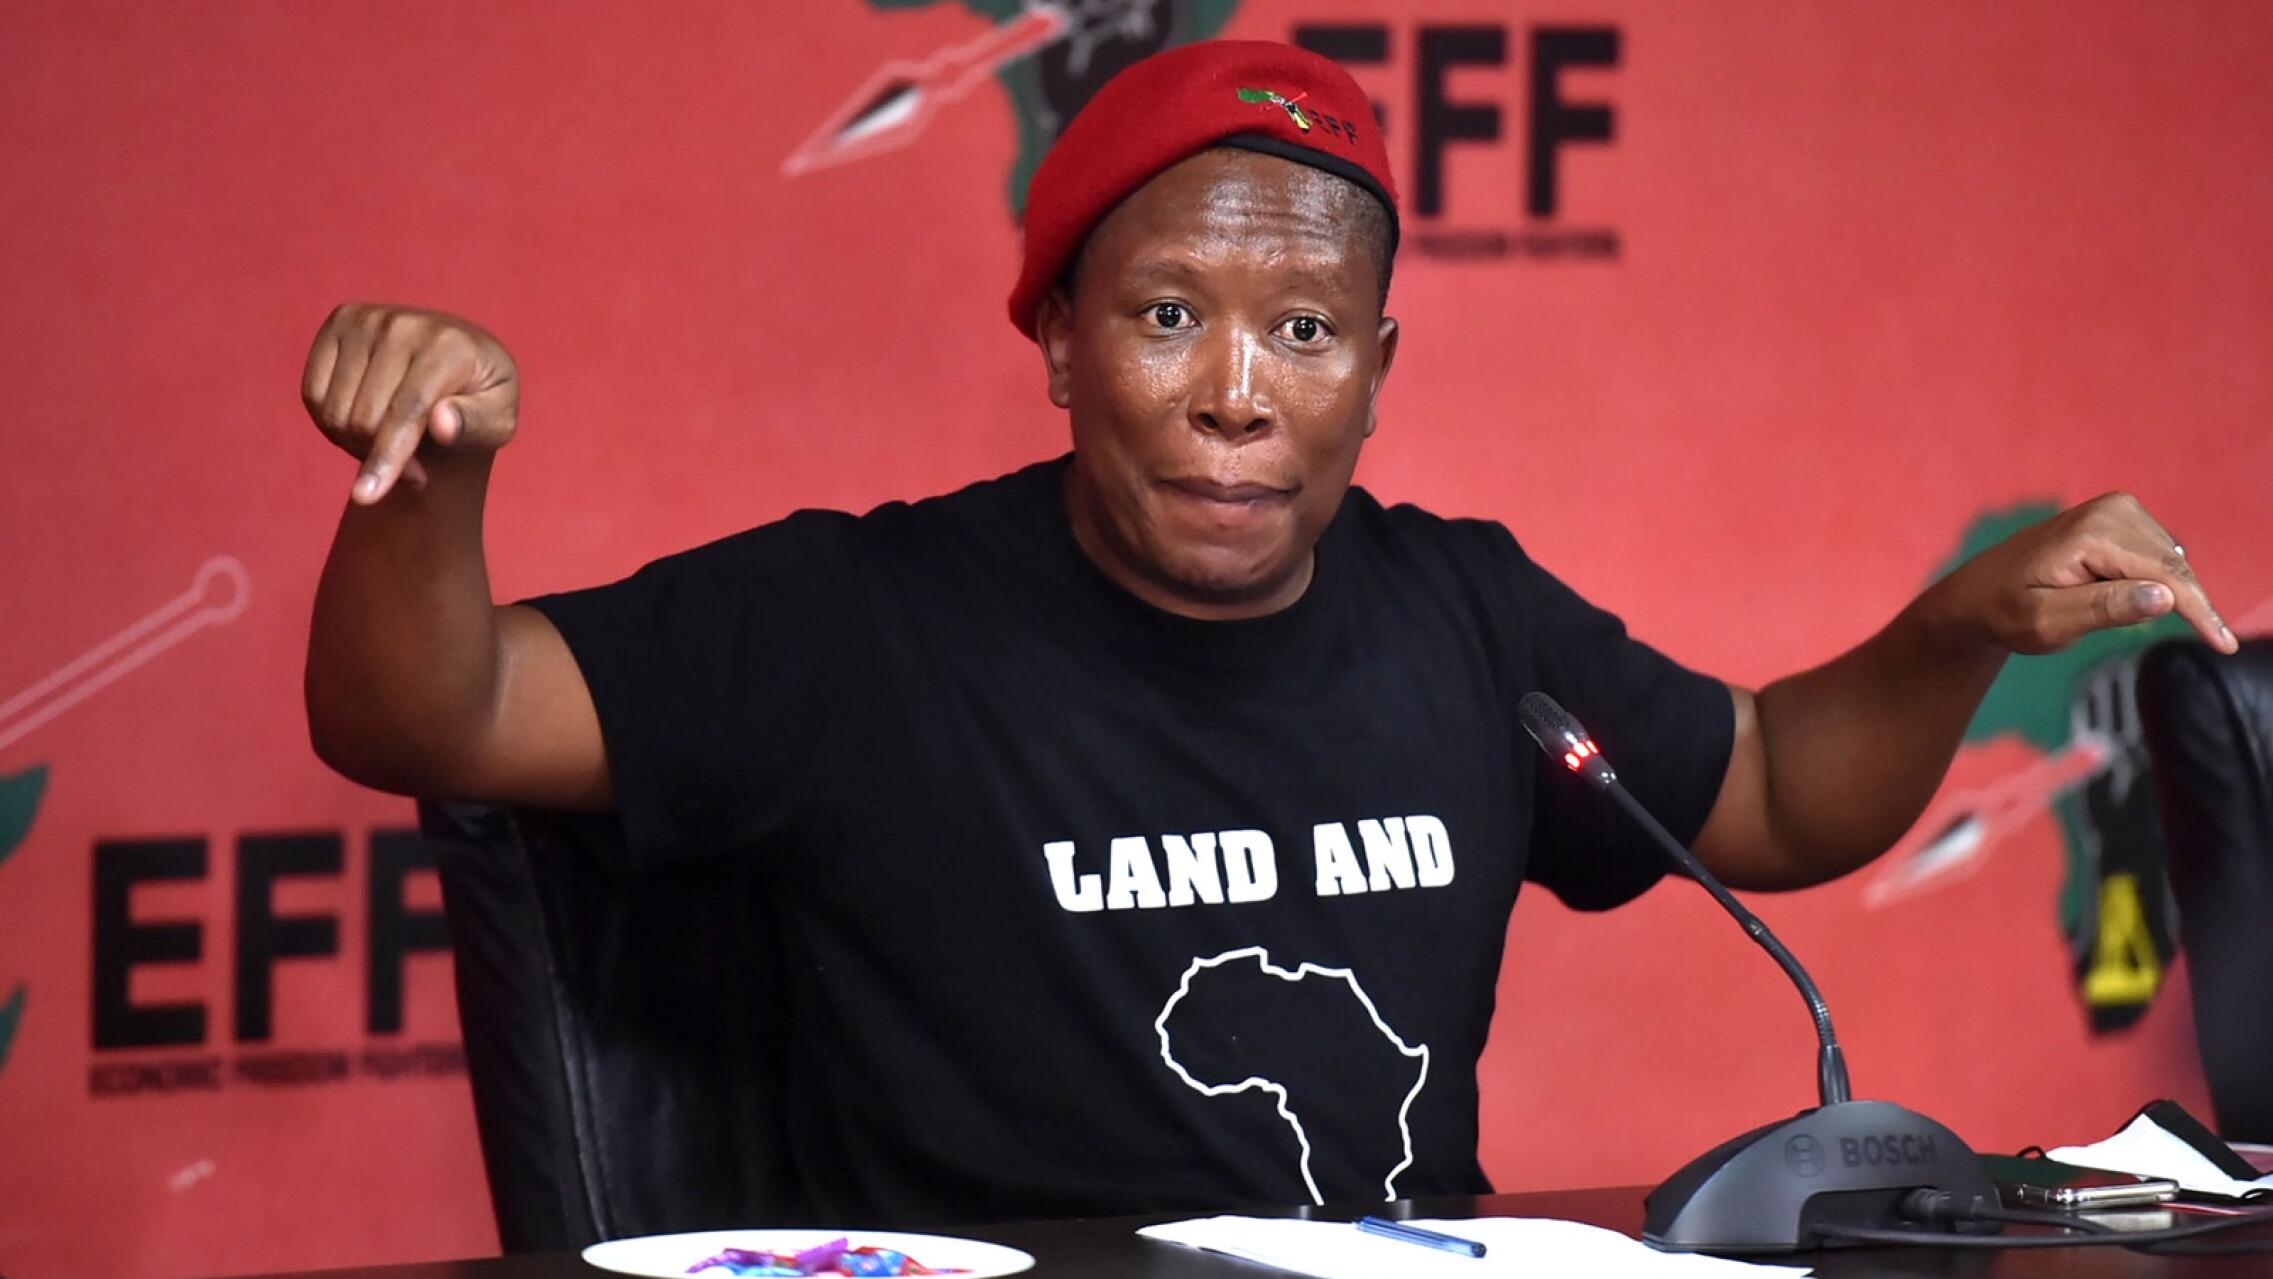 A man in black t-shirt and EFF banner behind him 